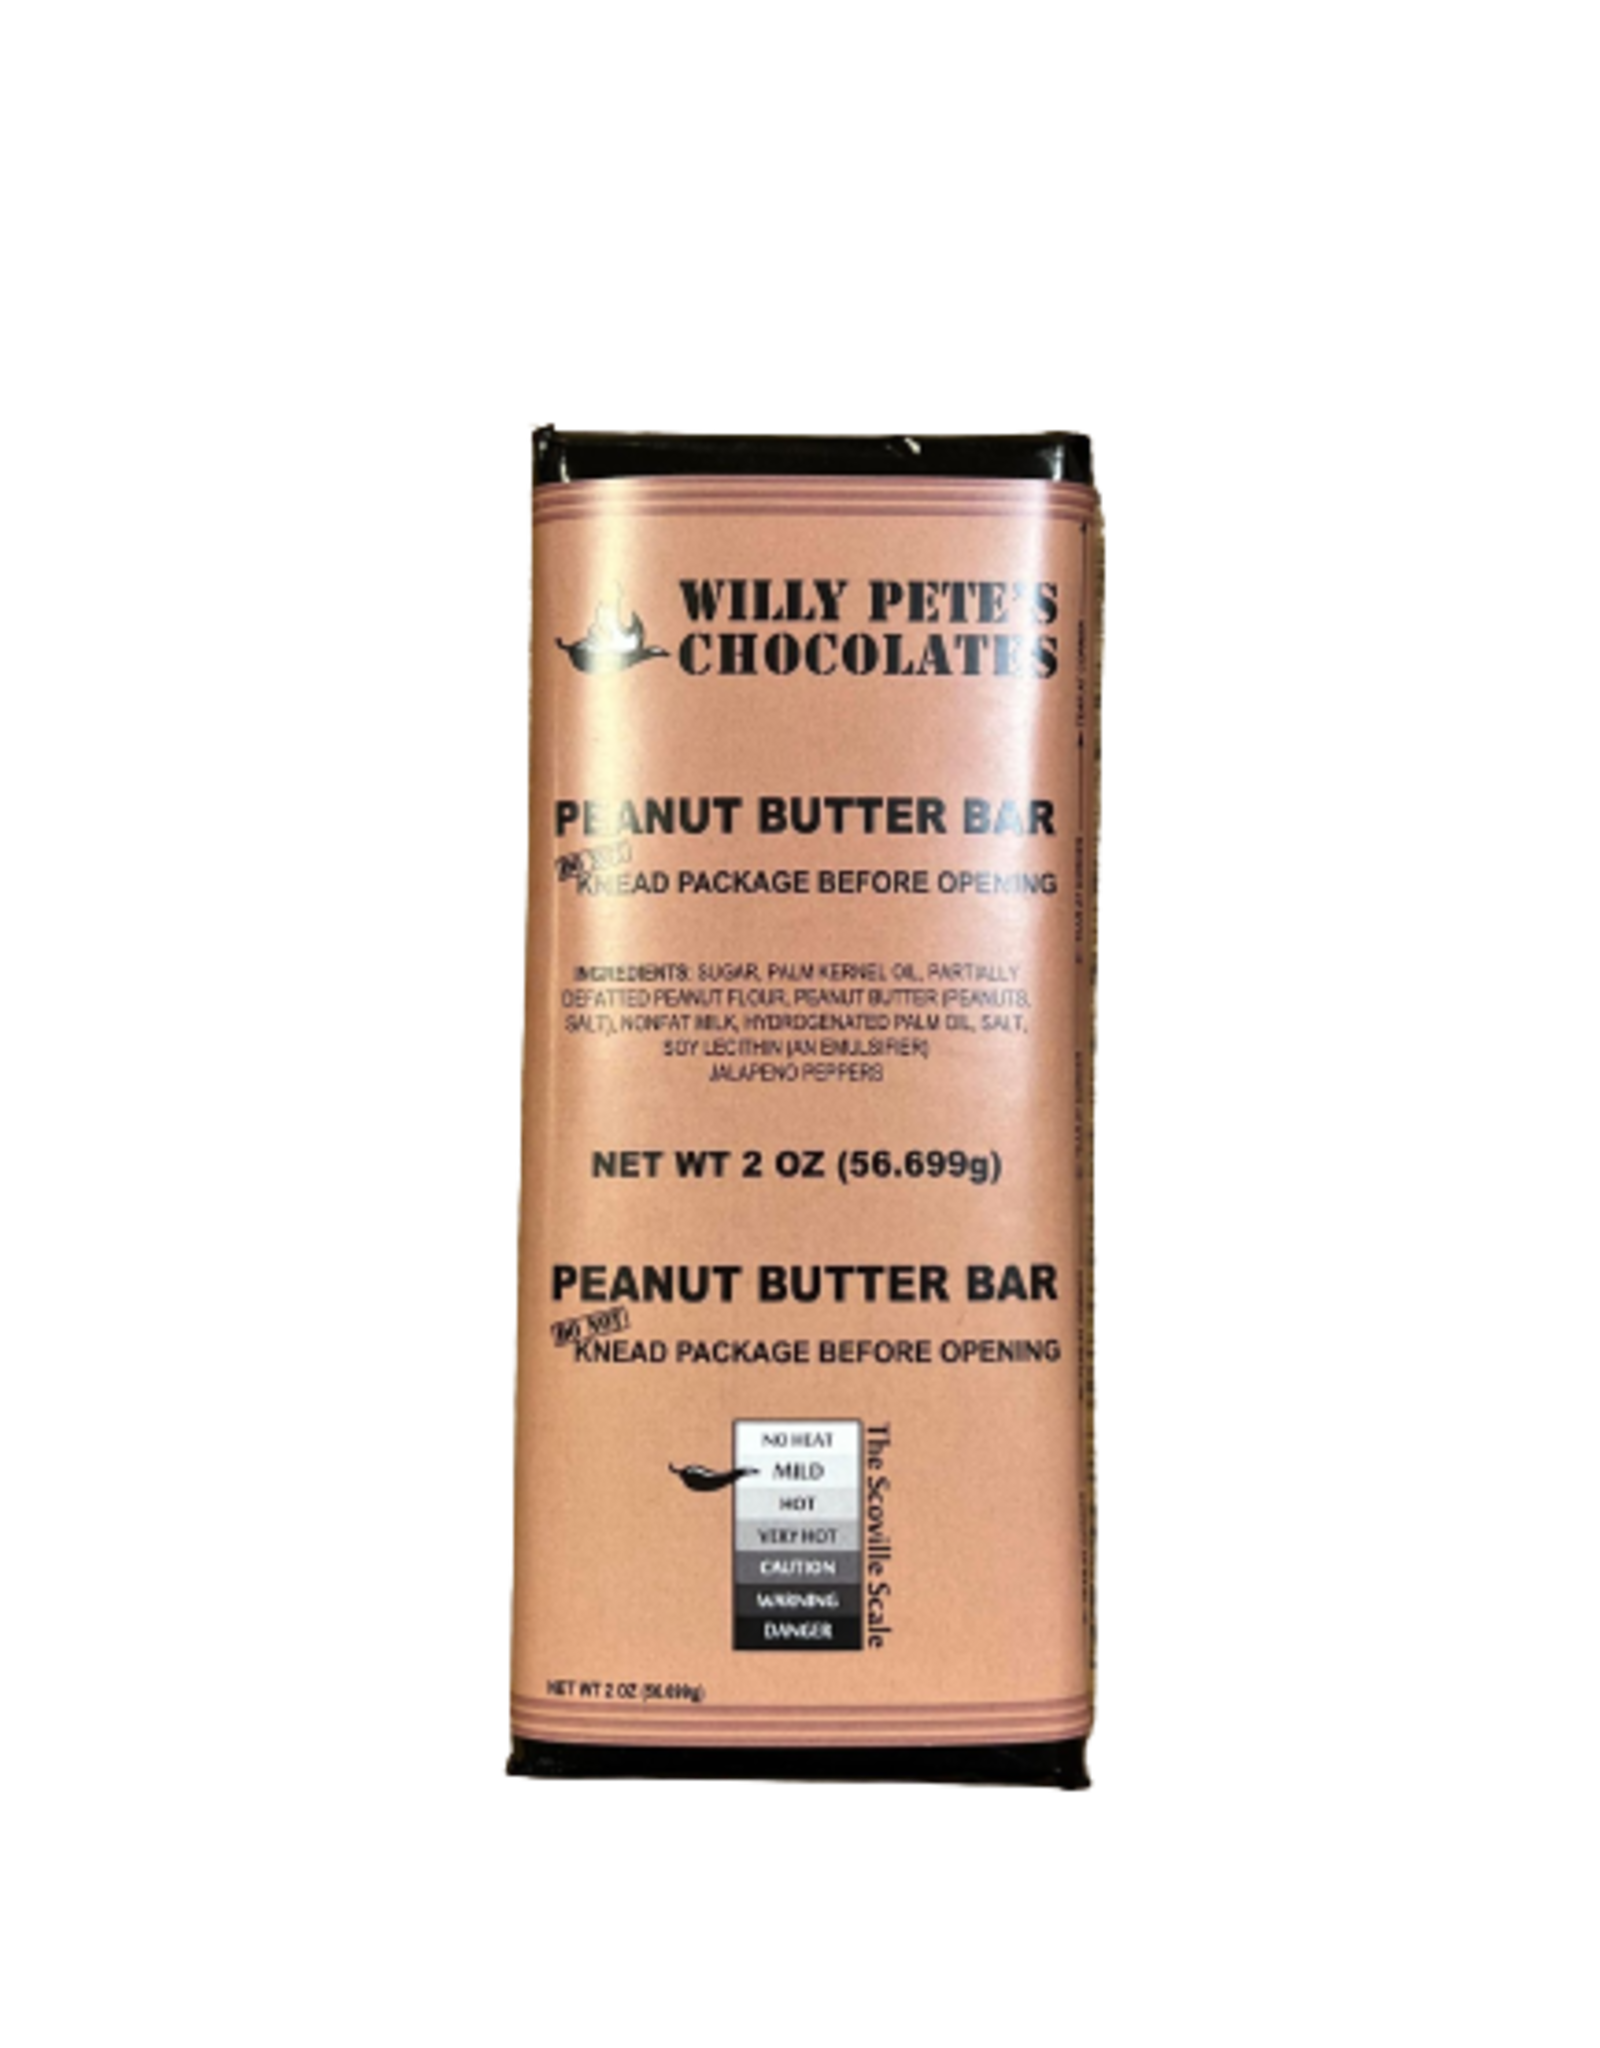 Willy pete’s Peanut Butter Bar